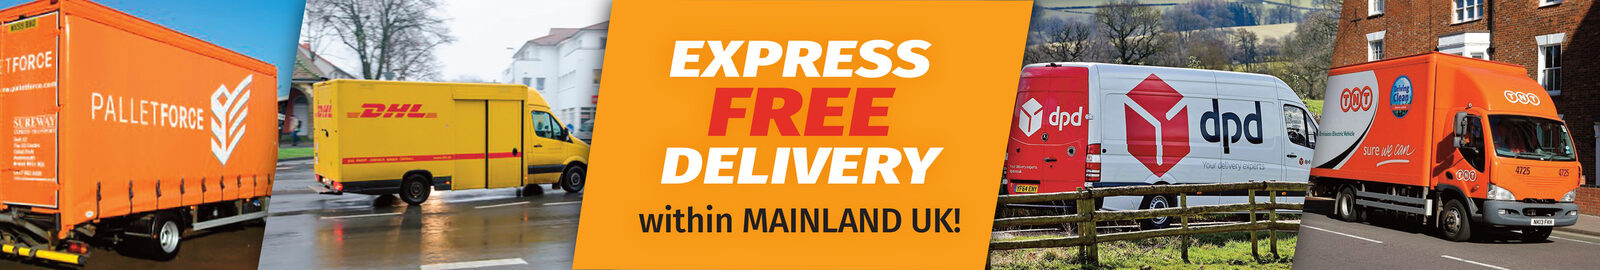 Express Free Delivery